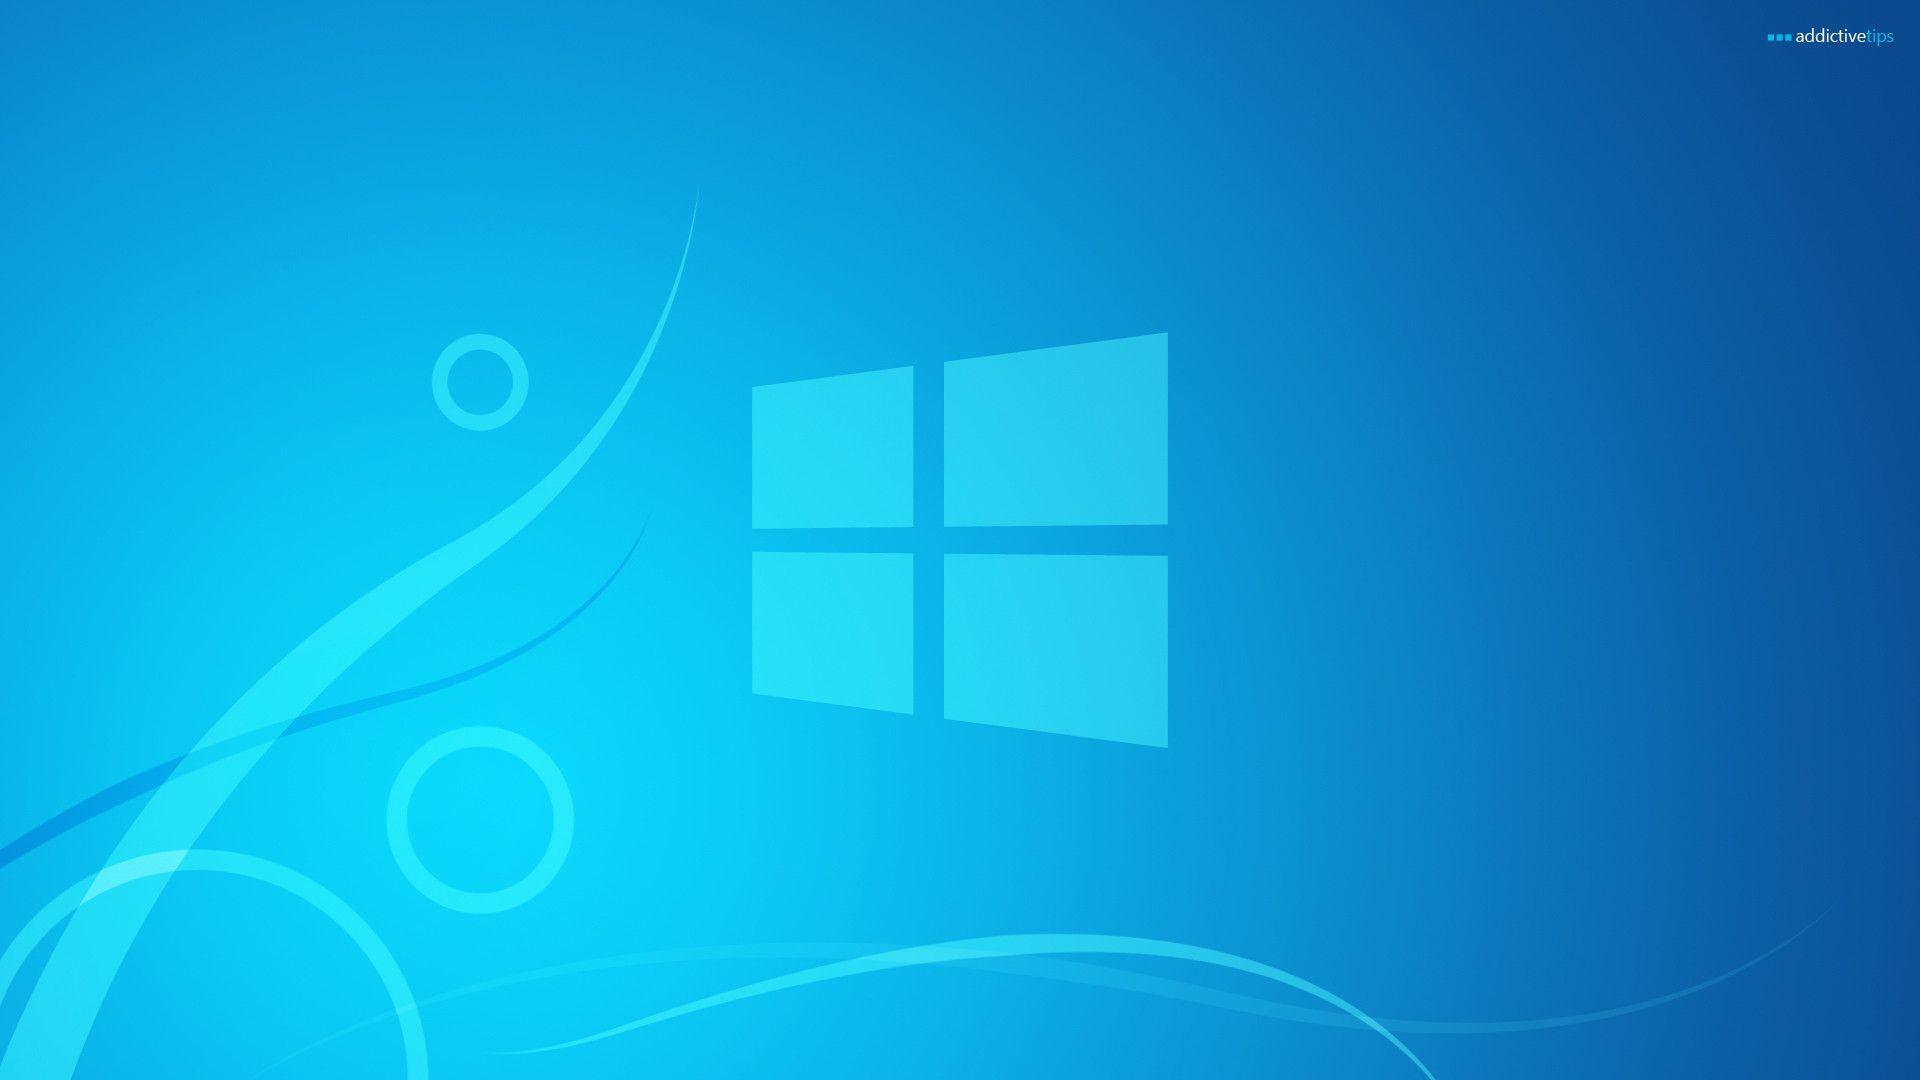 Windows 8 Official Wallpapers - Wallpaper Cave